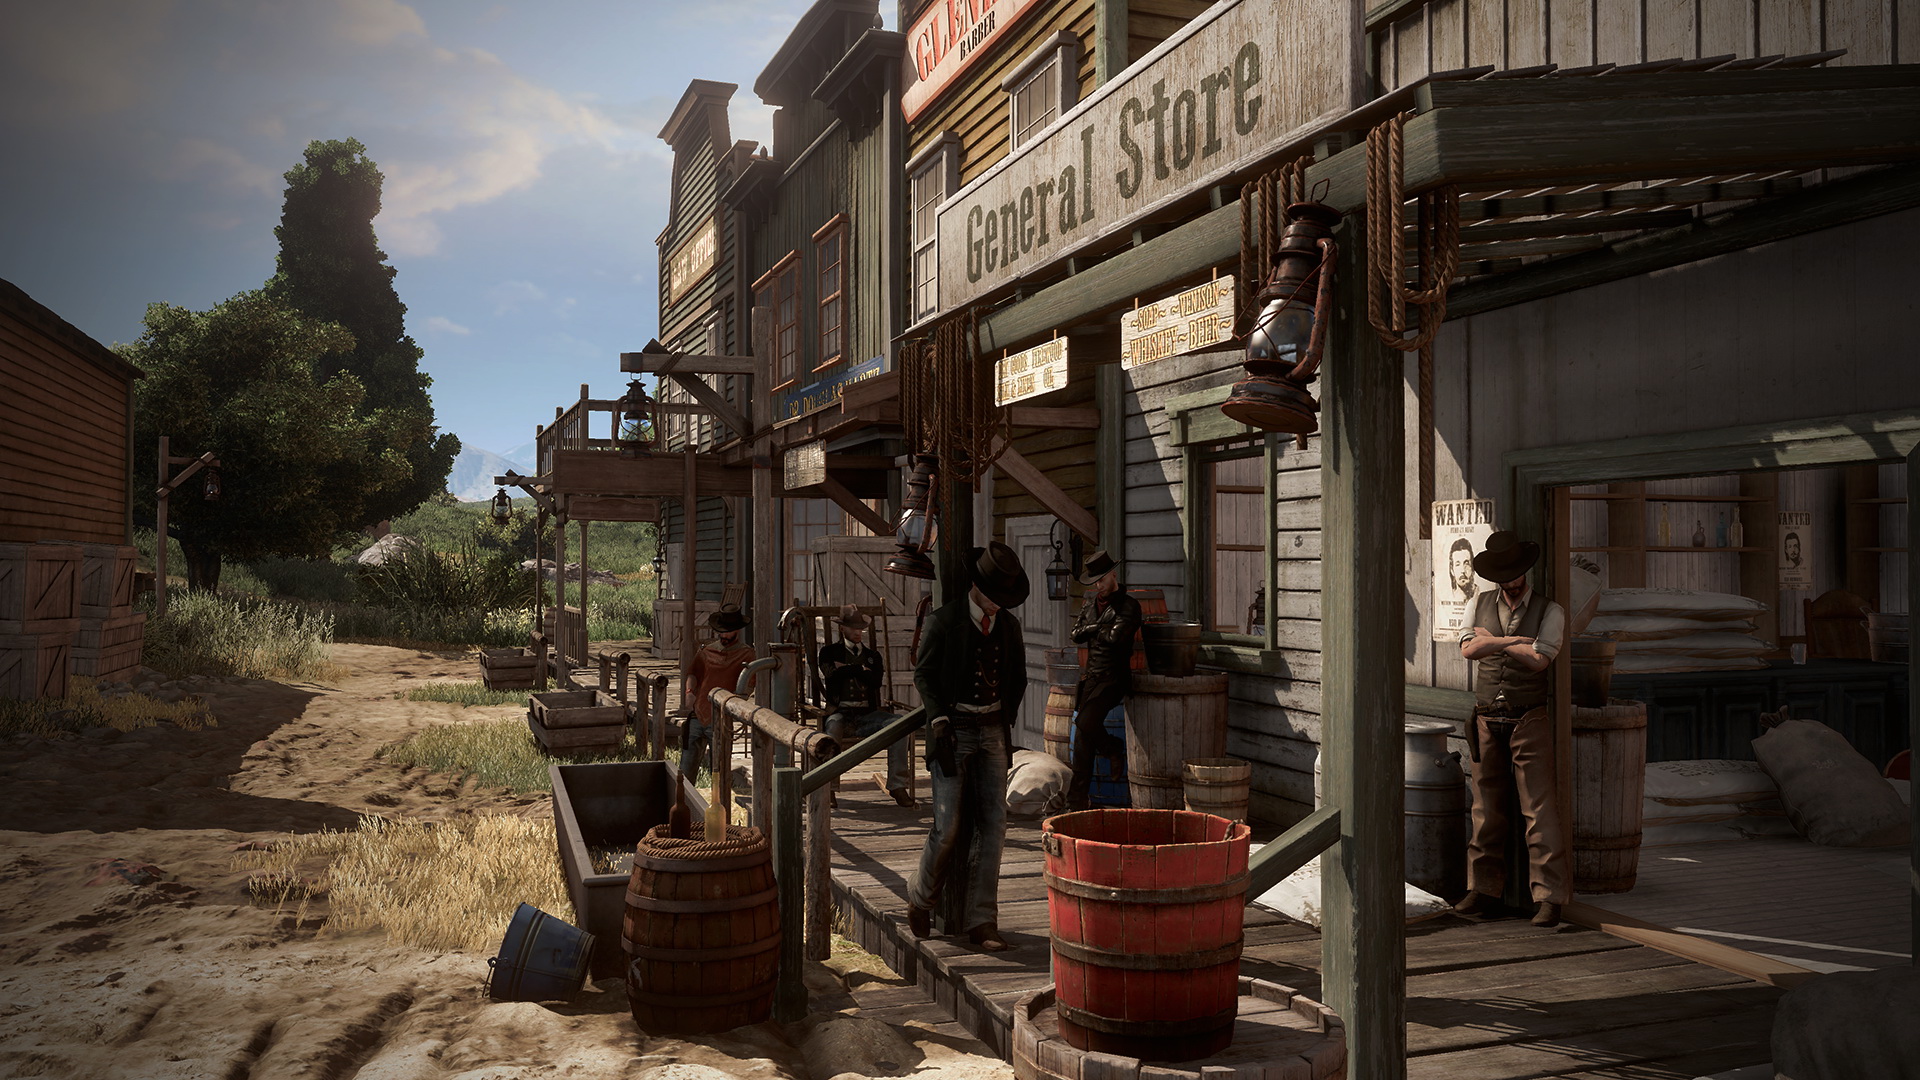 Wild West Critical Strike instal the last version for ios